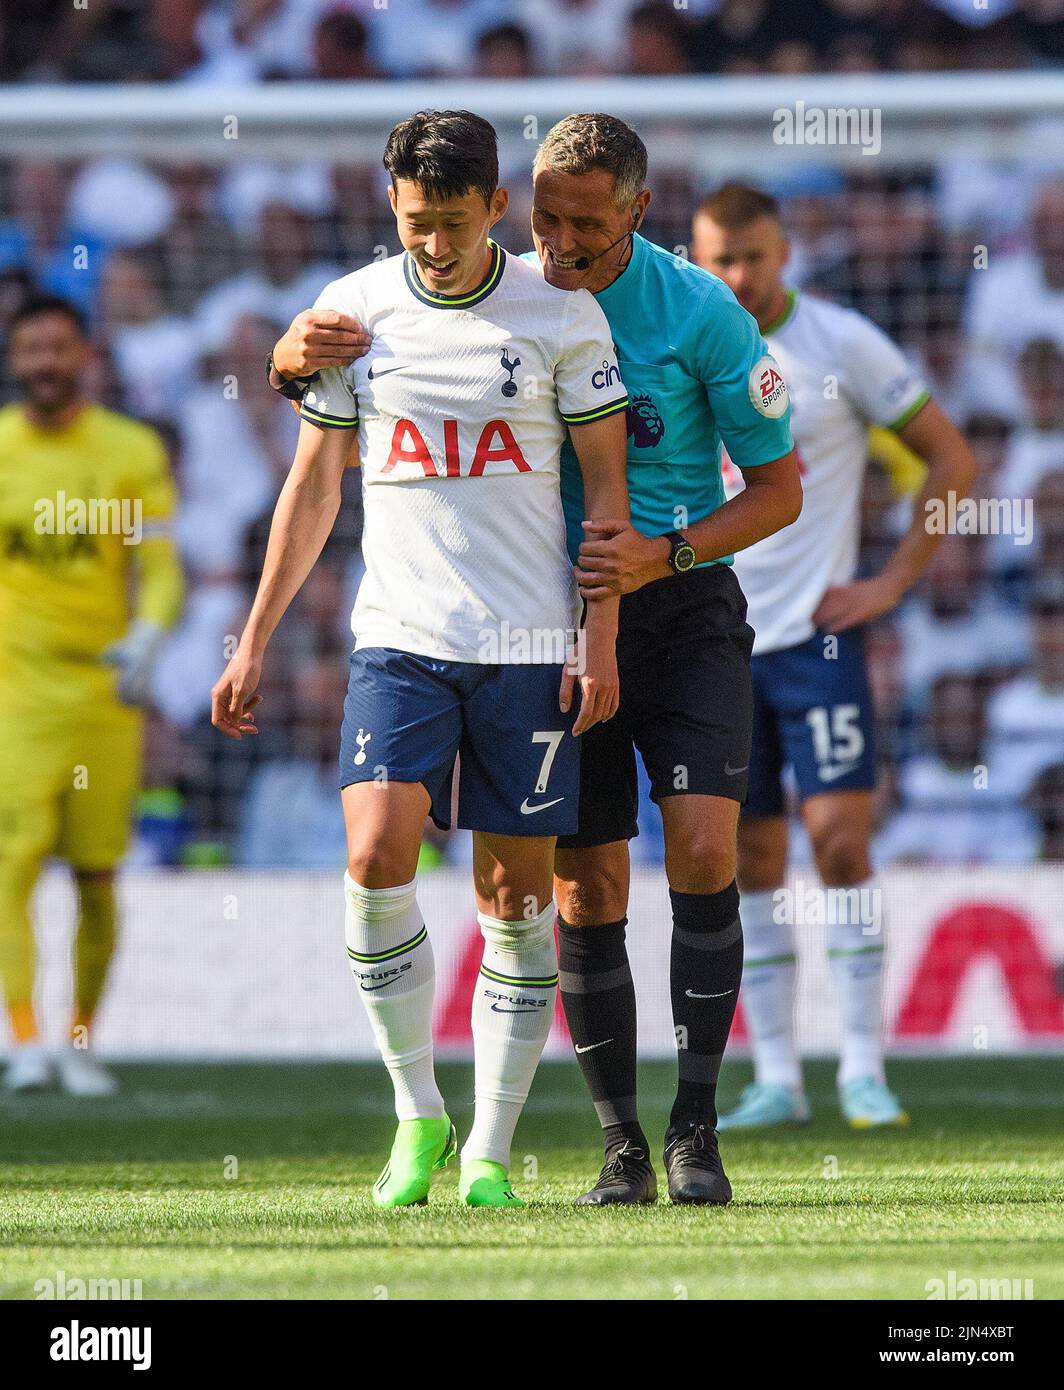 06 Aug 2022 - Tottenham Hotspur v Southampton - Premier League - Tottenham Hotspur Stadium  Tottenham's Heung-Min Son and Referee Andre Mariner during the match against Southampton Picture Credit : © Mark Pain / Alamy Live News Stock Photo